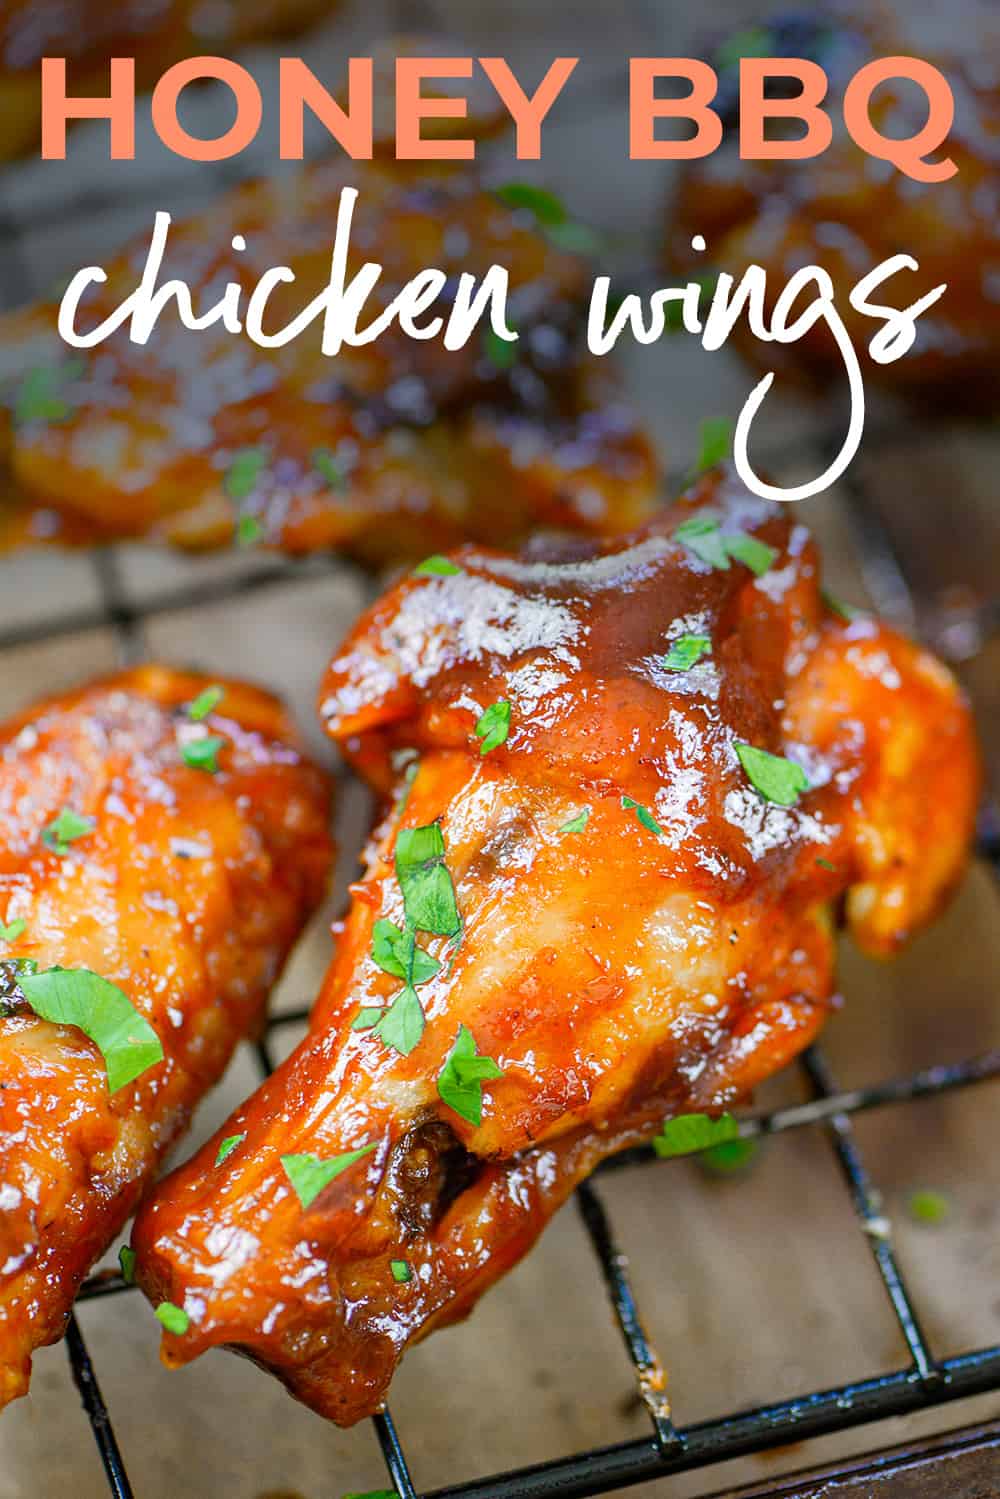 Honey BBQ Chicken Wings Recipe | Buns In My Oven